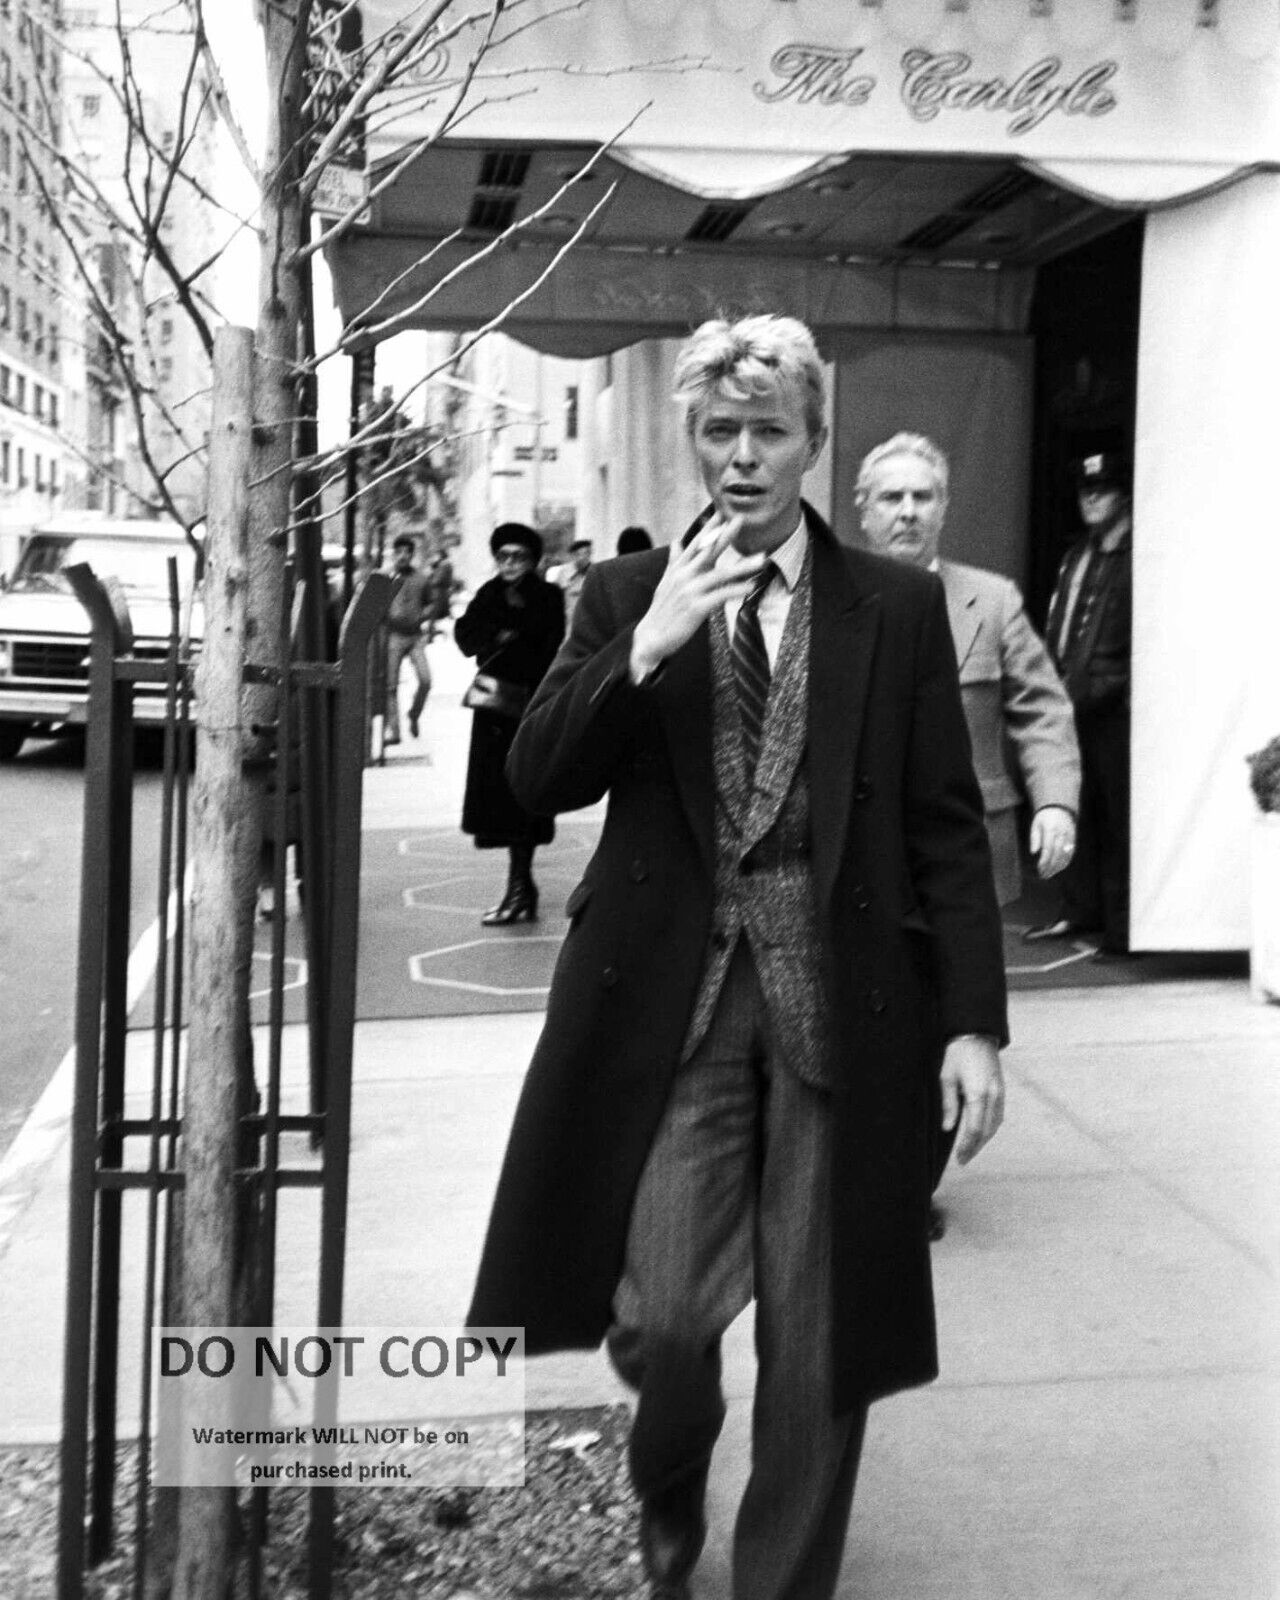 DAVID BOWIE OUTSIDE THE CARLYLE HOTEL IN NEW YORK  8X10 PUBLICITY PHOTO (FB-461)